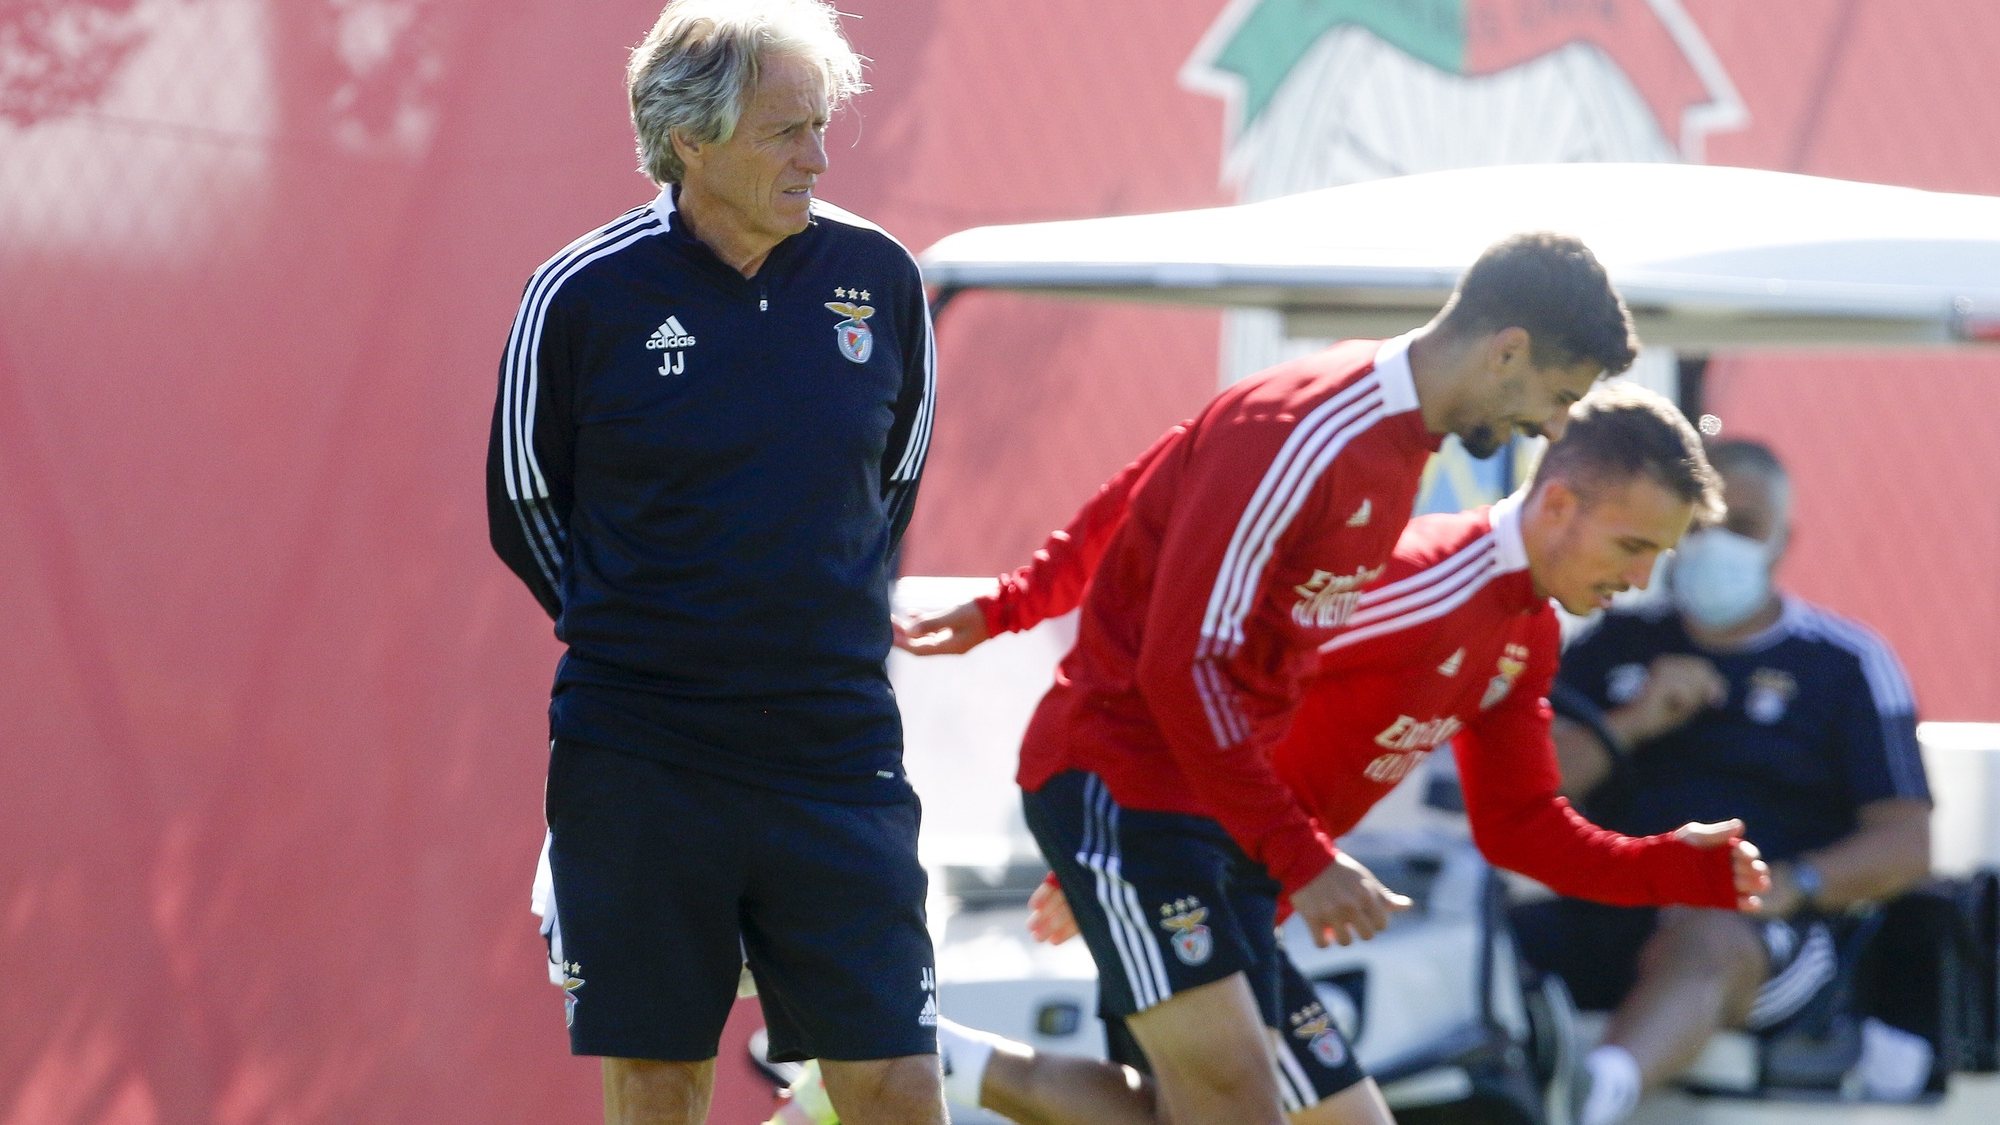 epa09492621 Benfica head coach Jorge Jesus during a training session in Seixal, Portugal, 28 September 2021. Benfica will face FC Barcelona in Lisbon on 29 September 2021 in their UEFA Champions League group stage soccer match.  EPA/RUI MINDERICO